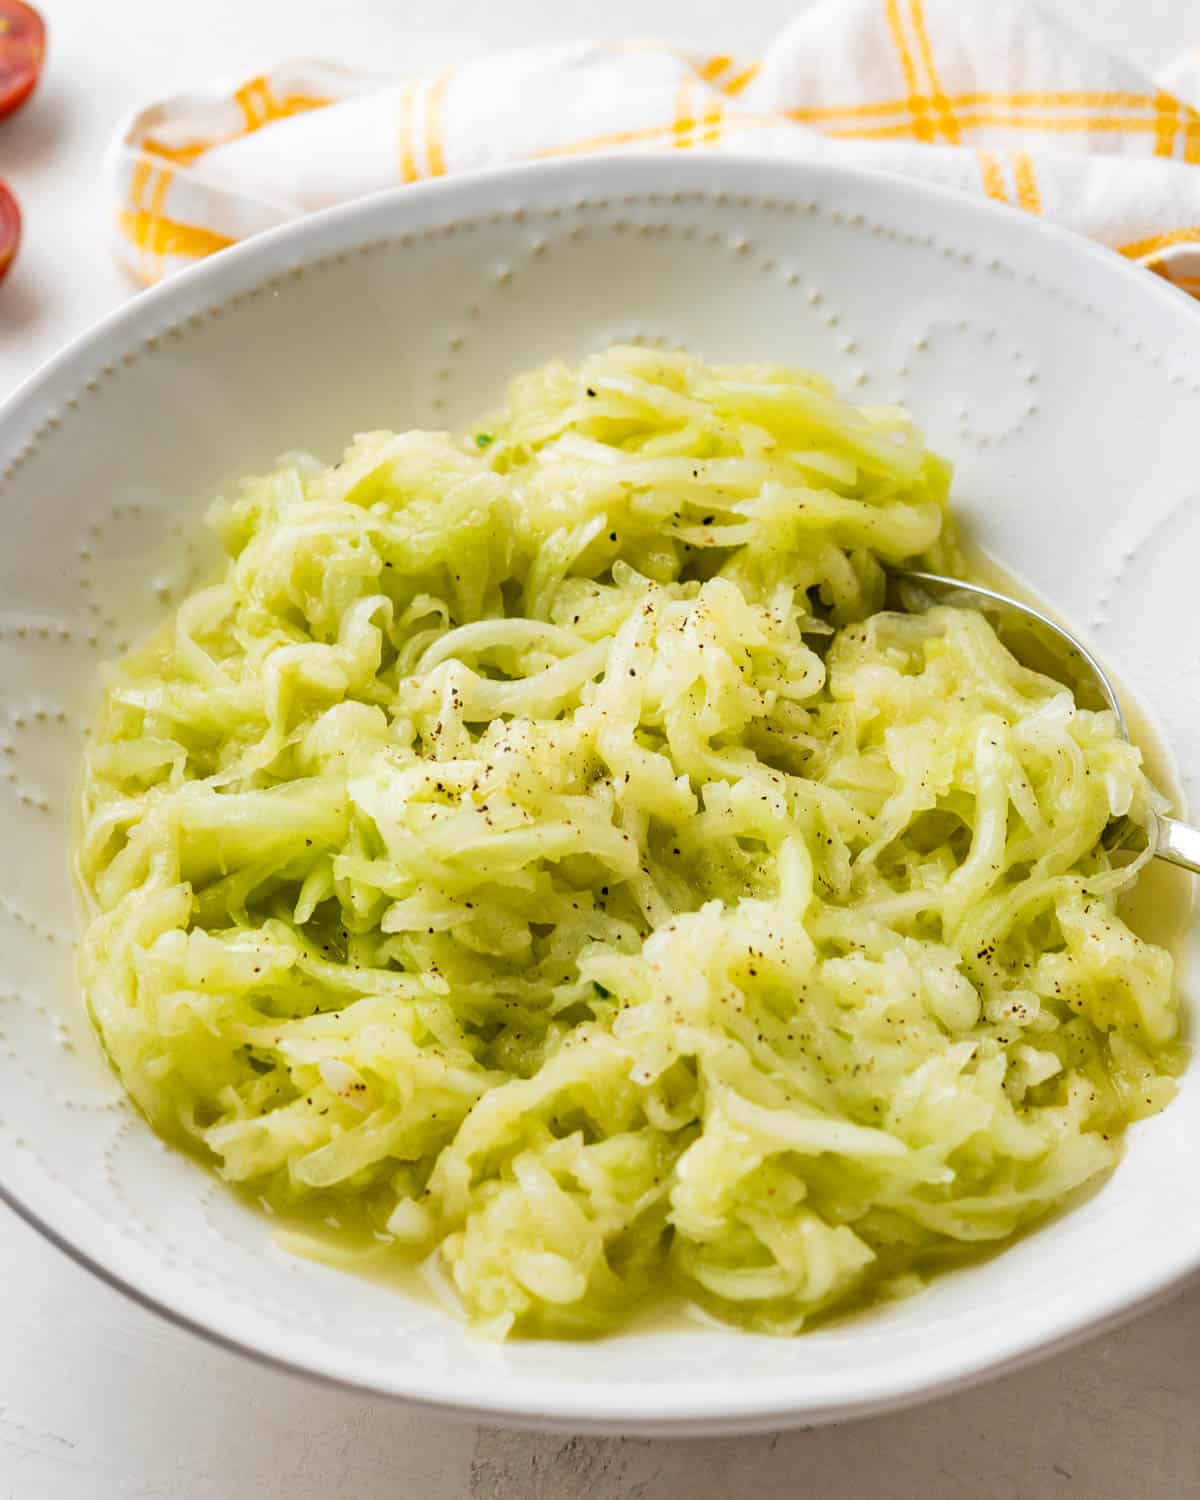 A bowl of the grated cucumber salad with a serving spoon.